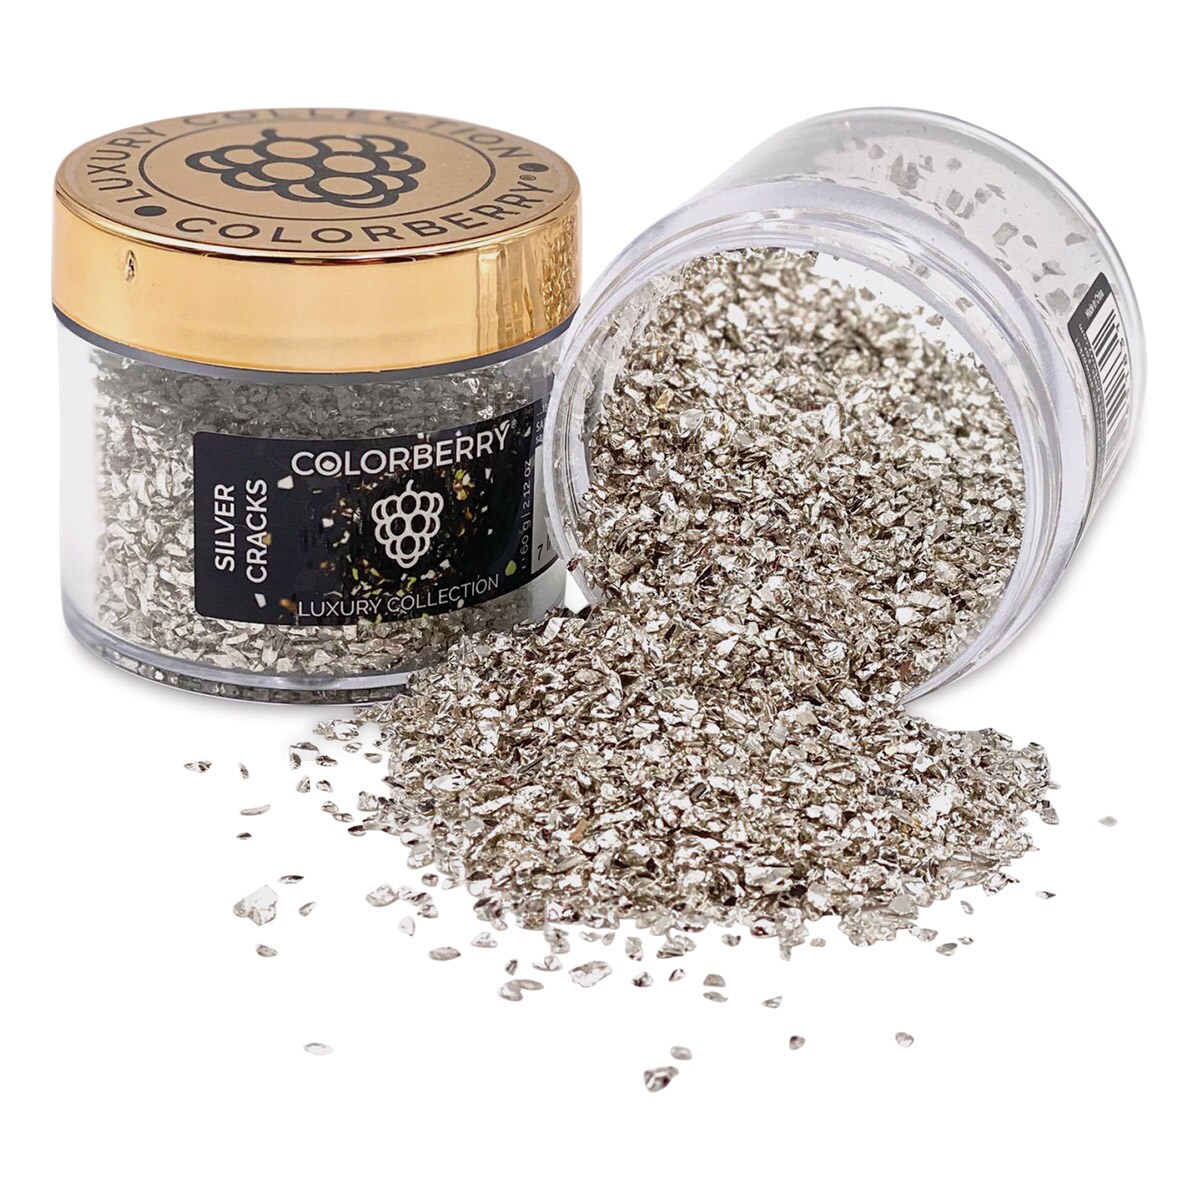 Colorberry Luxury Collection Resin Additive - Silver Cracks, 60 g, Jar